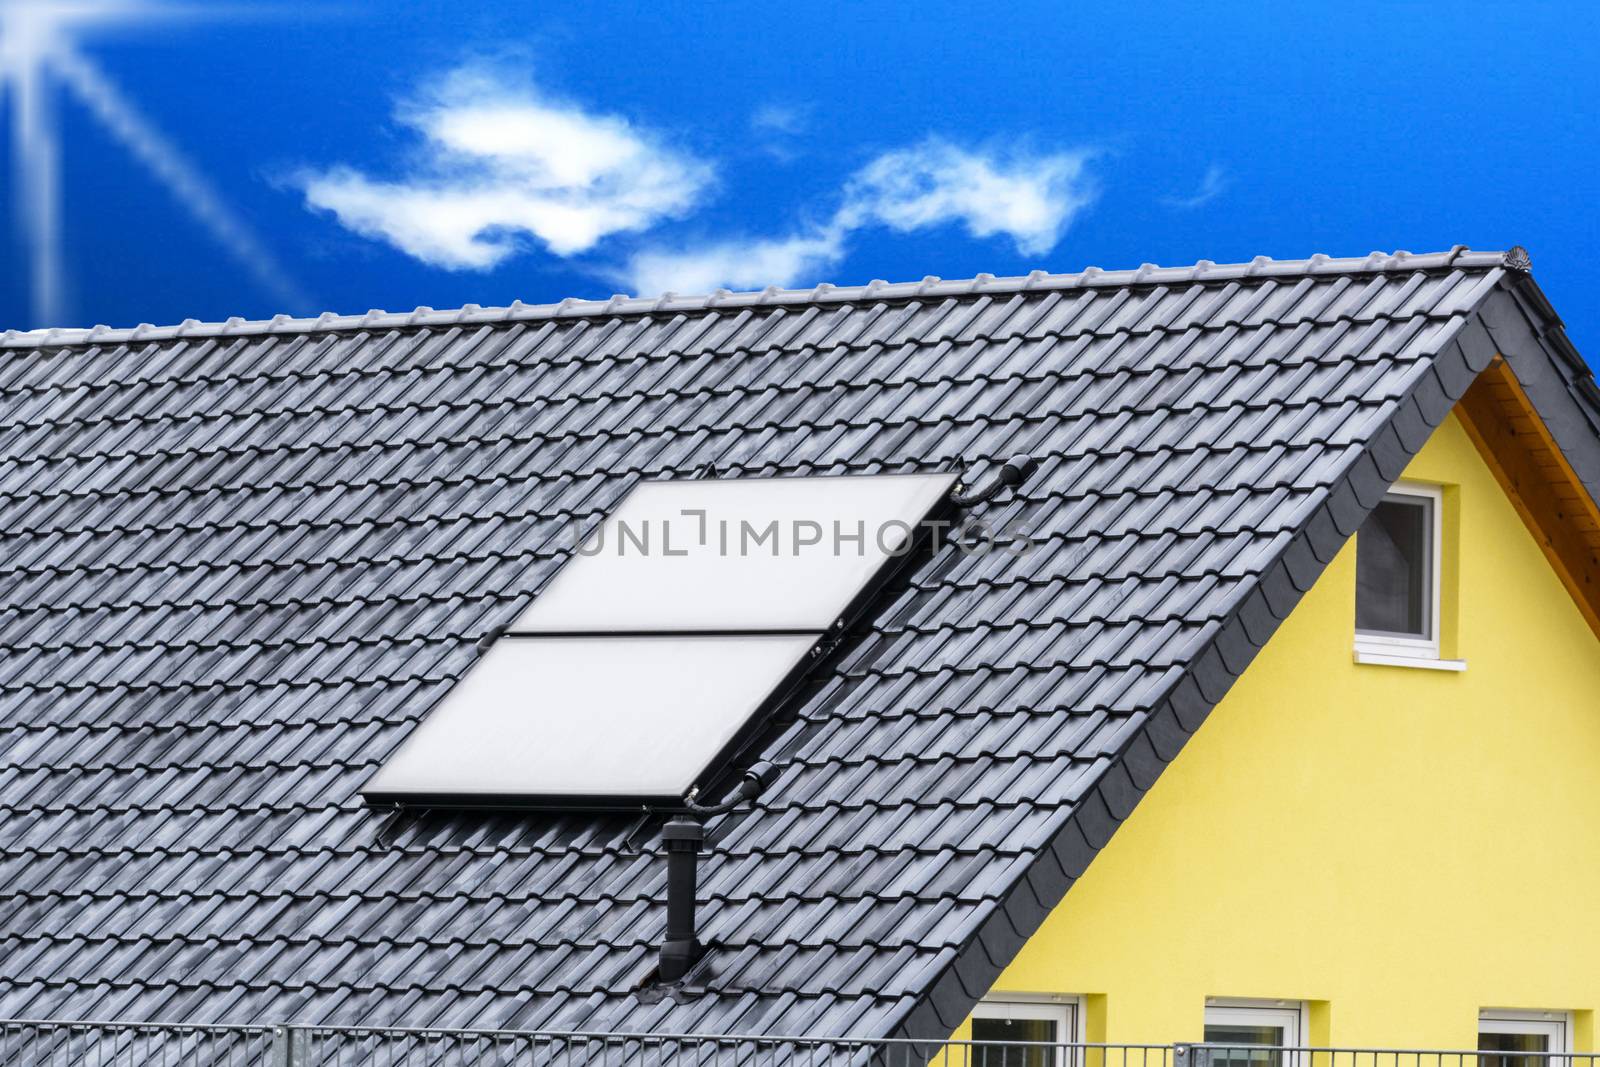 Solar panels on the roof of a house with blue sky in the background.